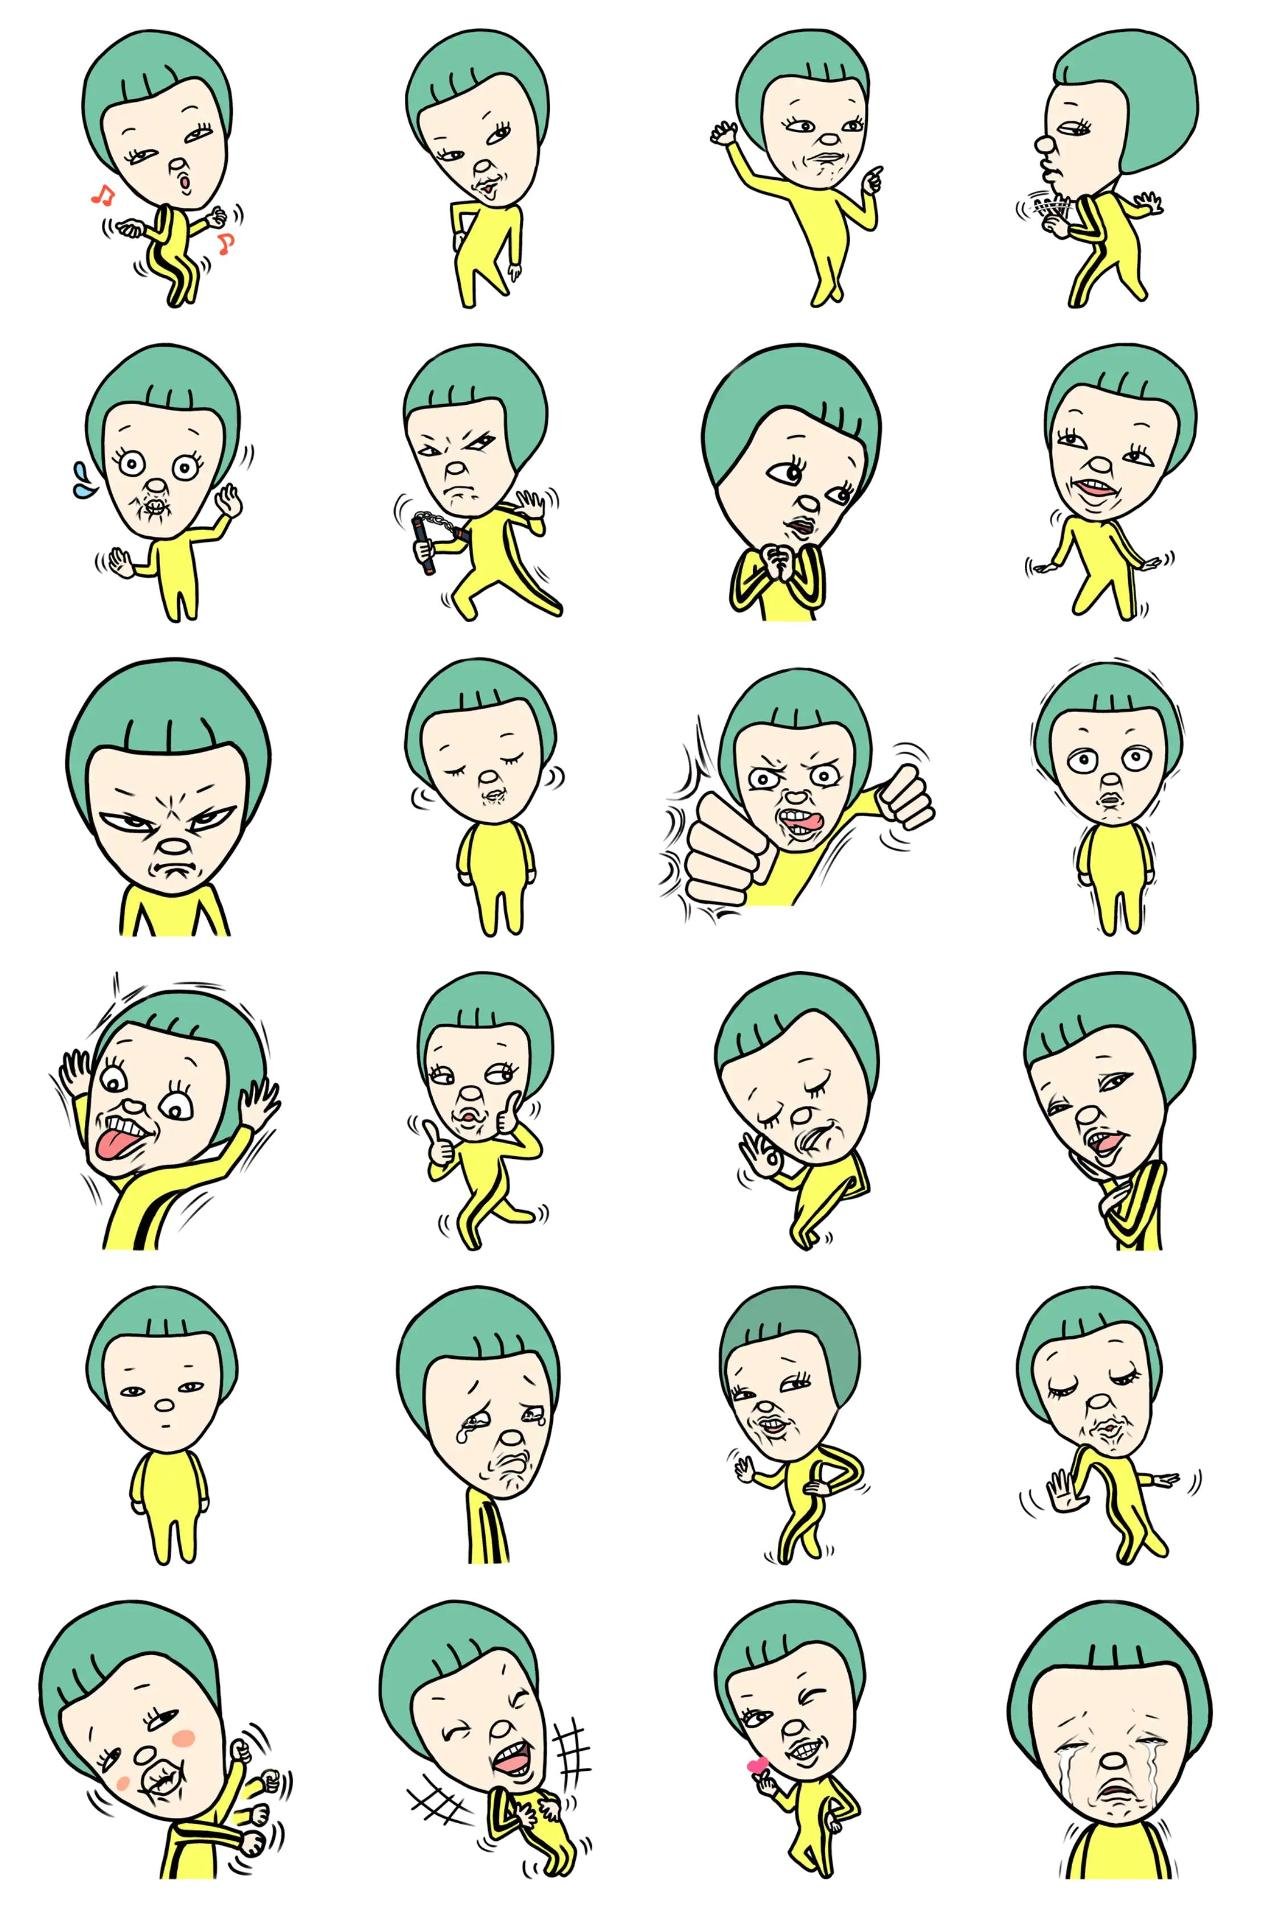 Dancing martial arts girl Assa People sticker pack for Whatsapp, Telegram, Signal, and others chatting and message apps